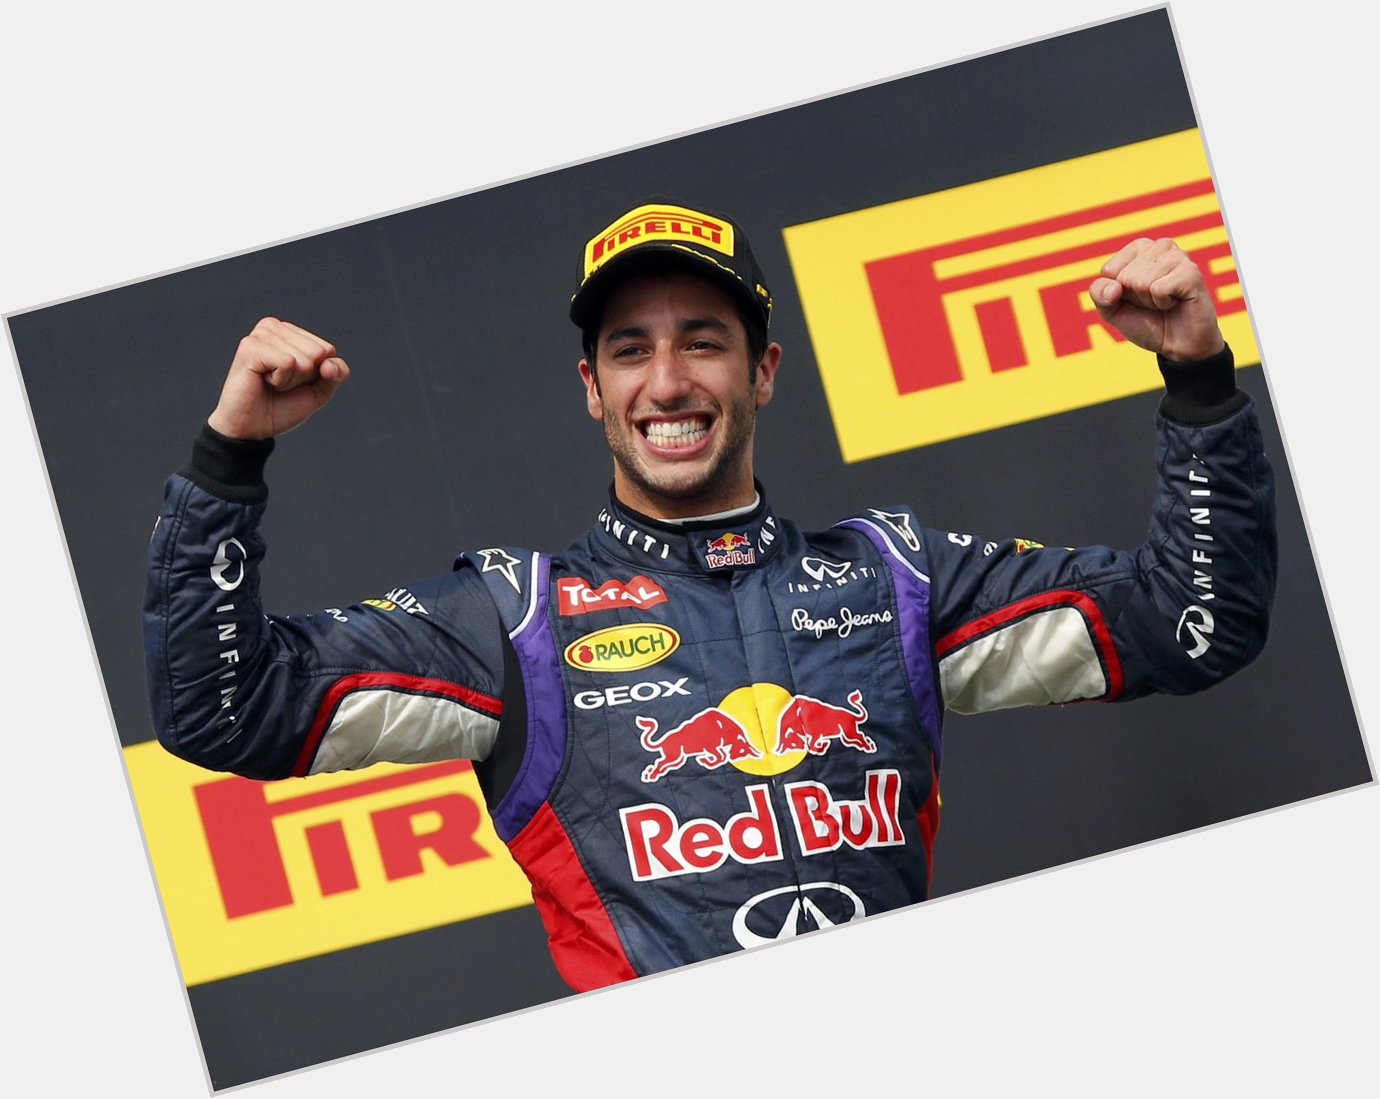 Happy birthday to the driver that smiles the most on the grid. Daniel Ricciardo. We hope its a good one mate! 